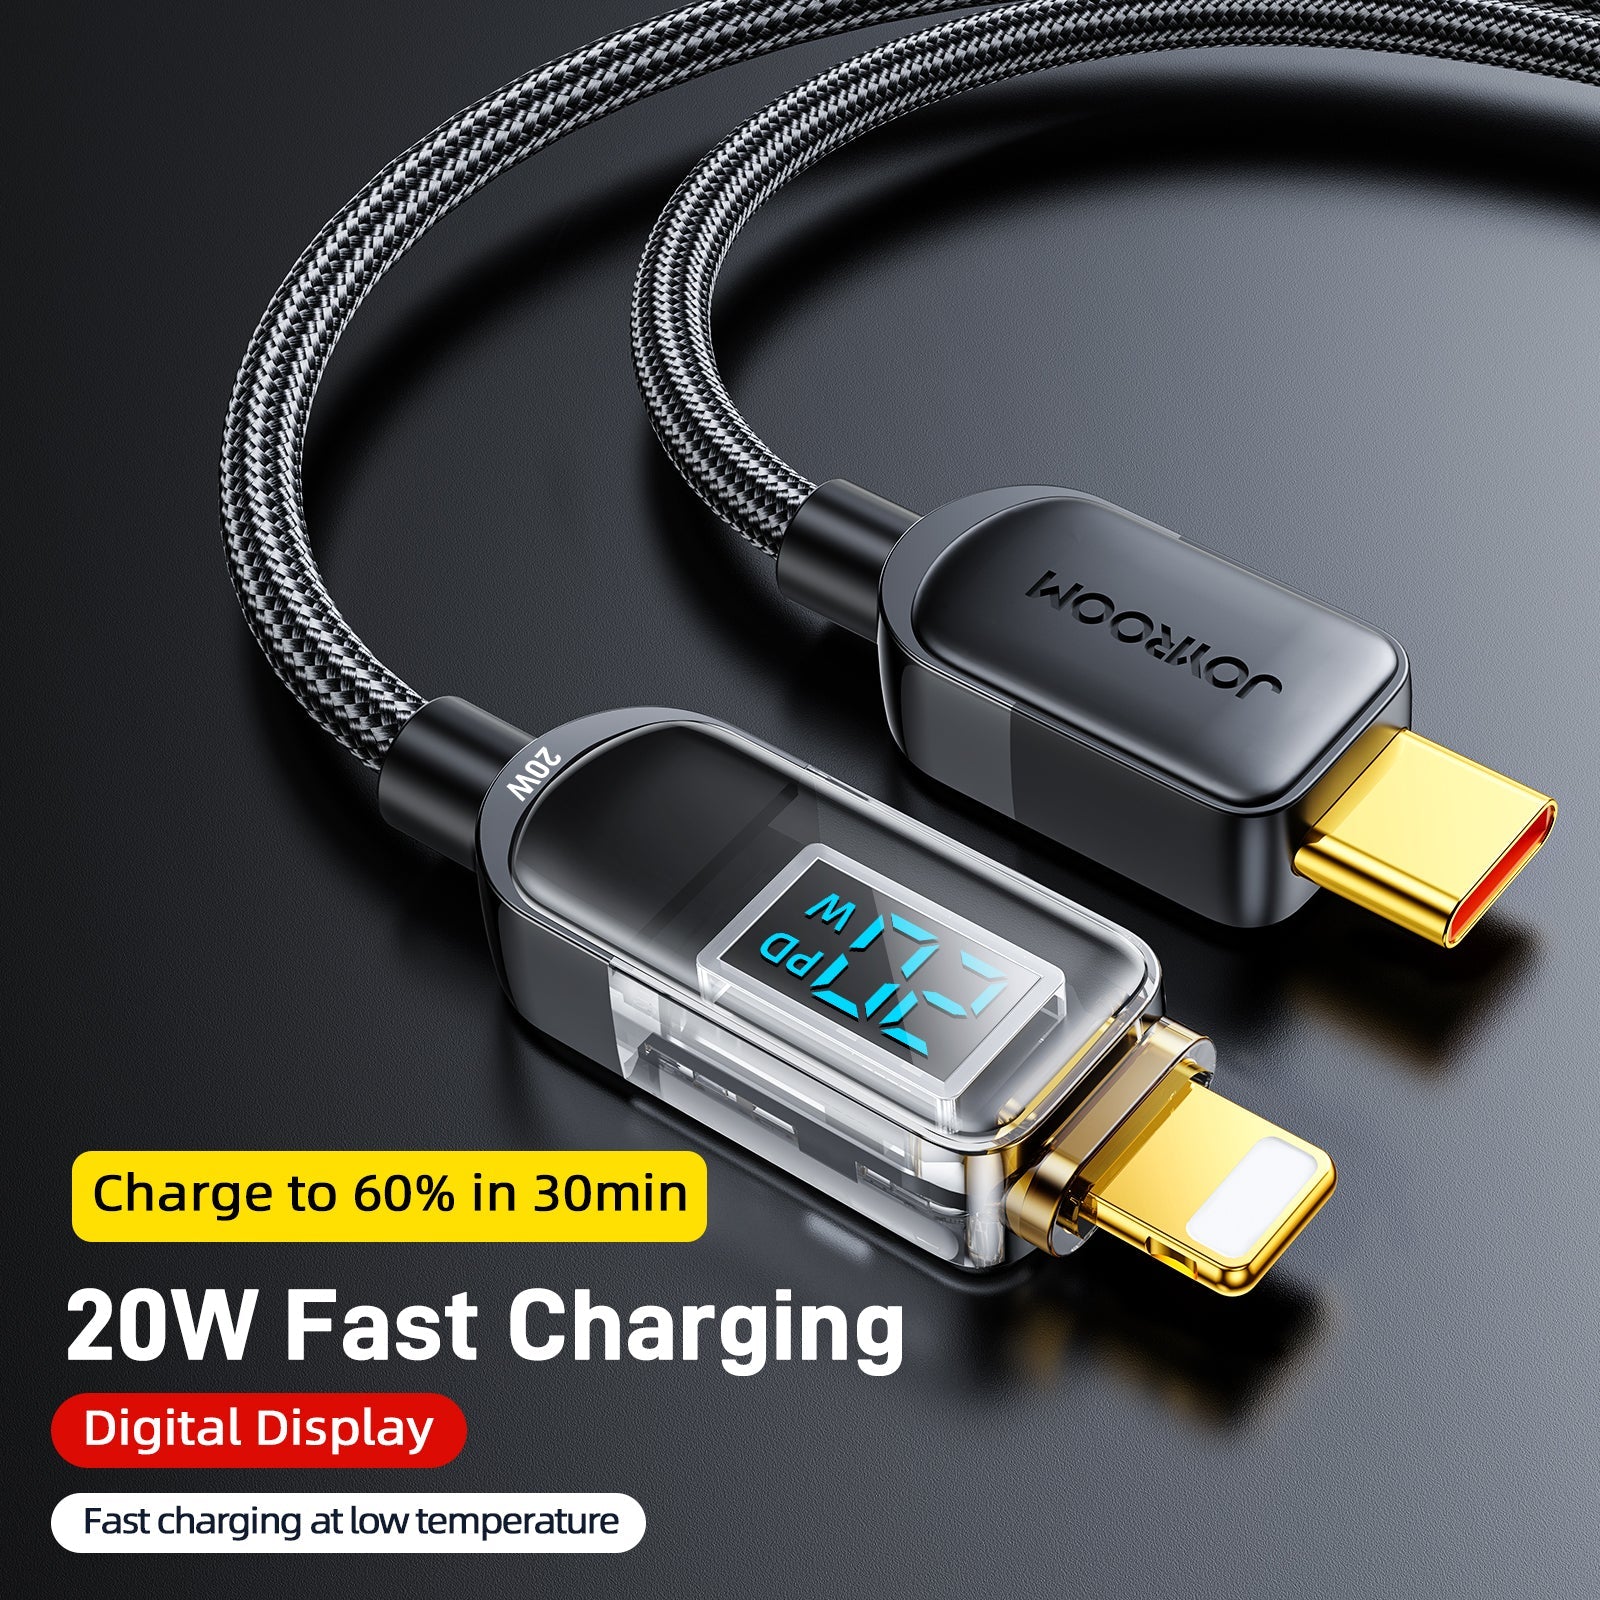 Joyroom 20W Digital Display Fast Charging Data Cable 1.2m Type c to Lightning Cable